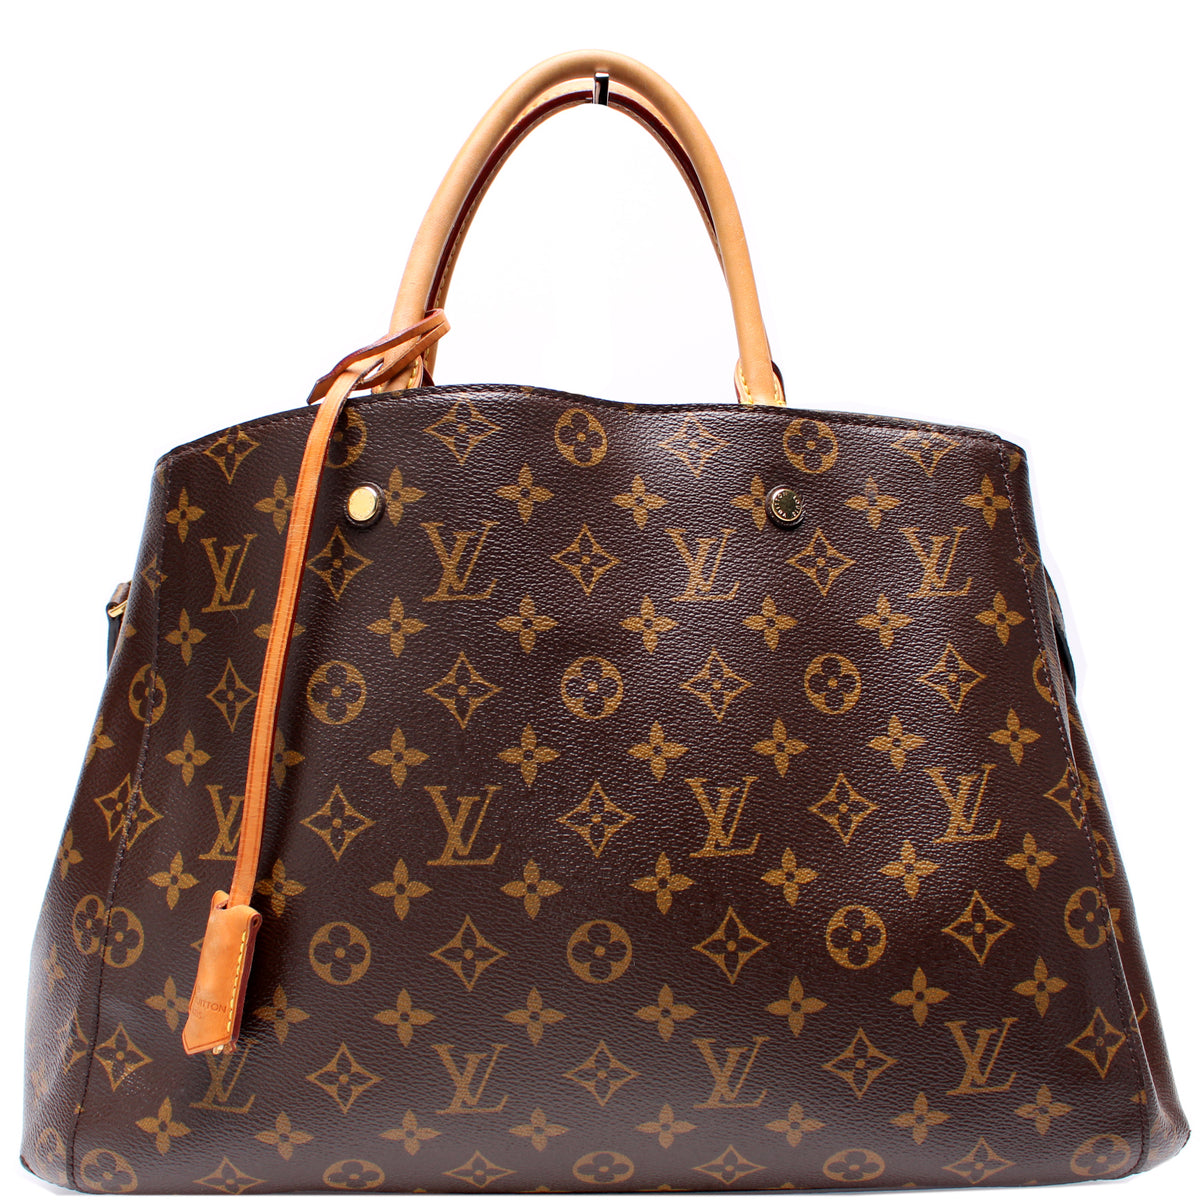 Louis Vuitton - Authenticated Montaigne Handbag - Leather Brown for Women, Very Good Condition